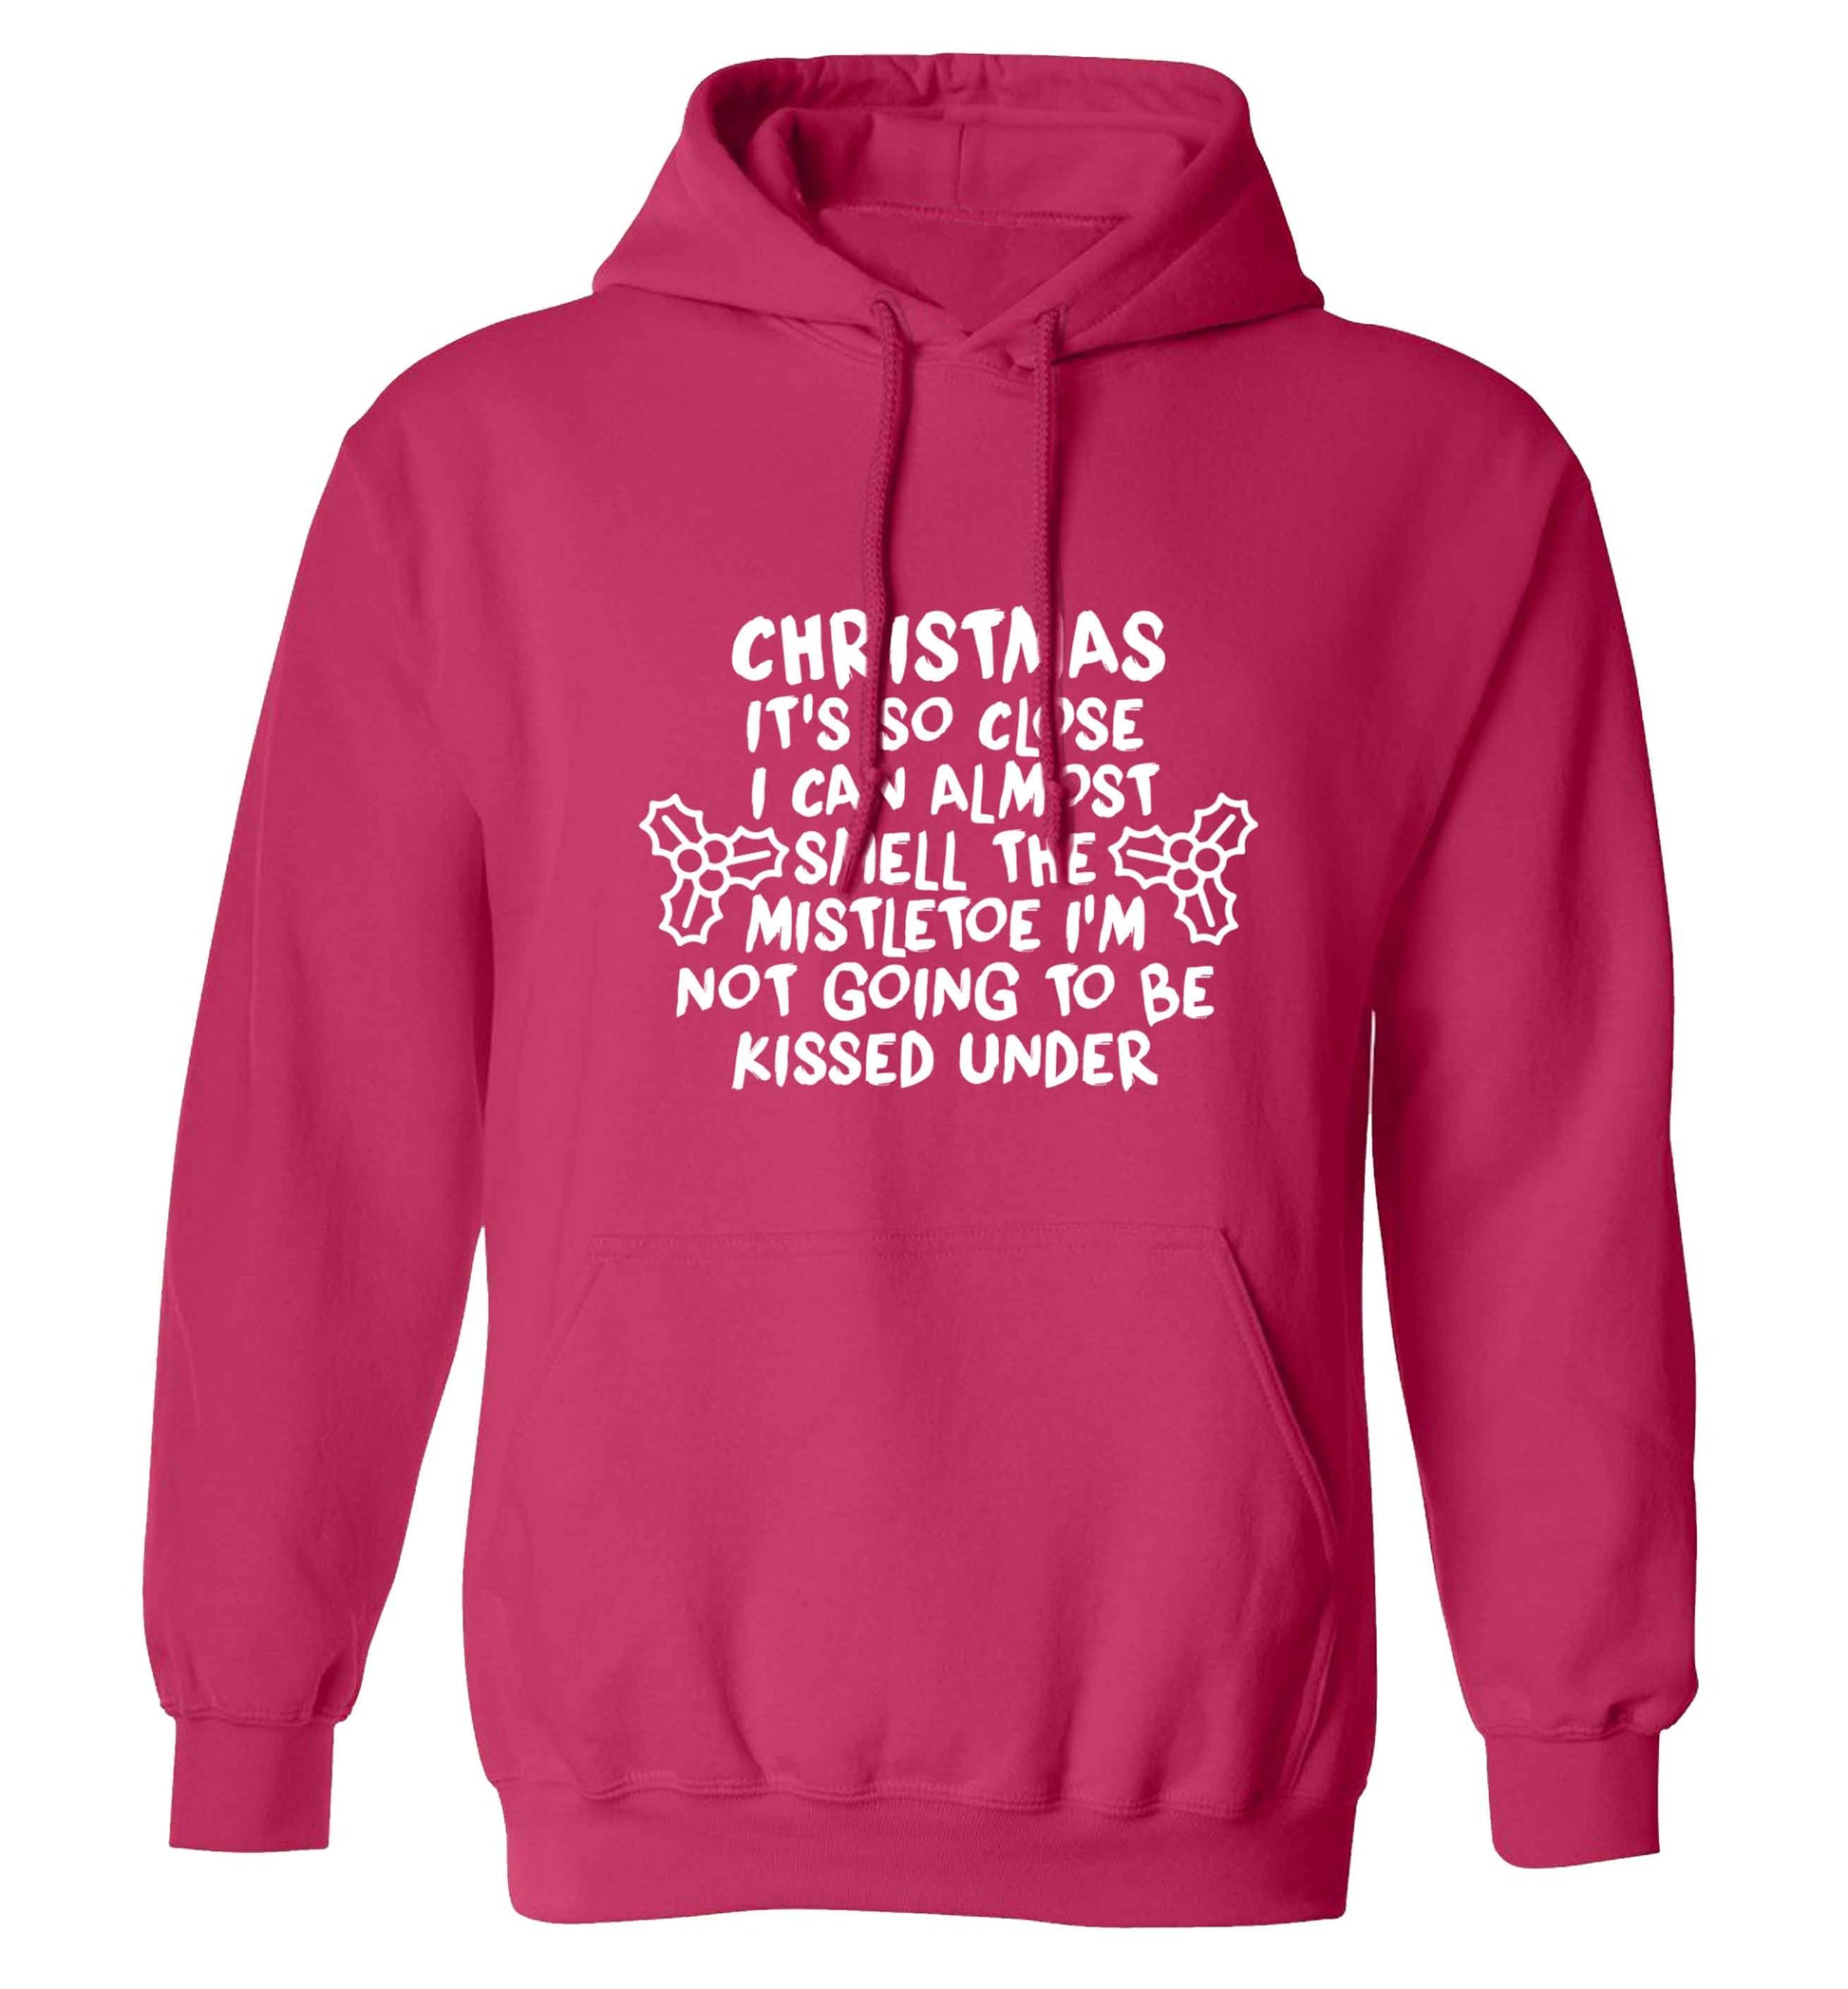 Christmas it's so close I can almost smell the misteltoe I'm not going to be kissed under adults unisex pink hoodie 2XL